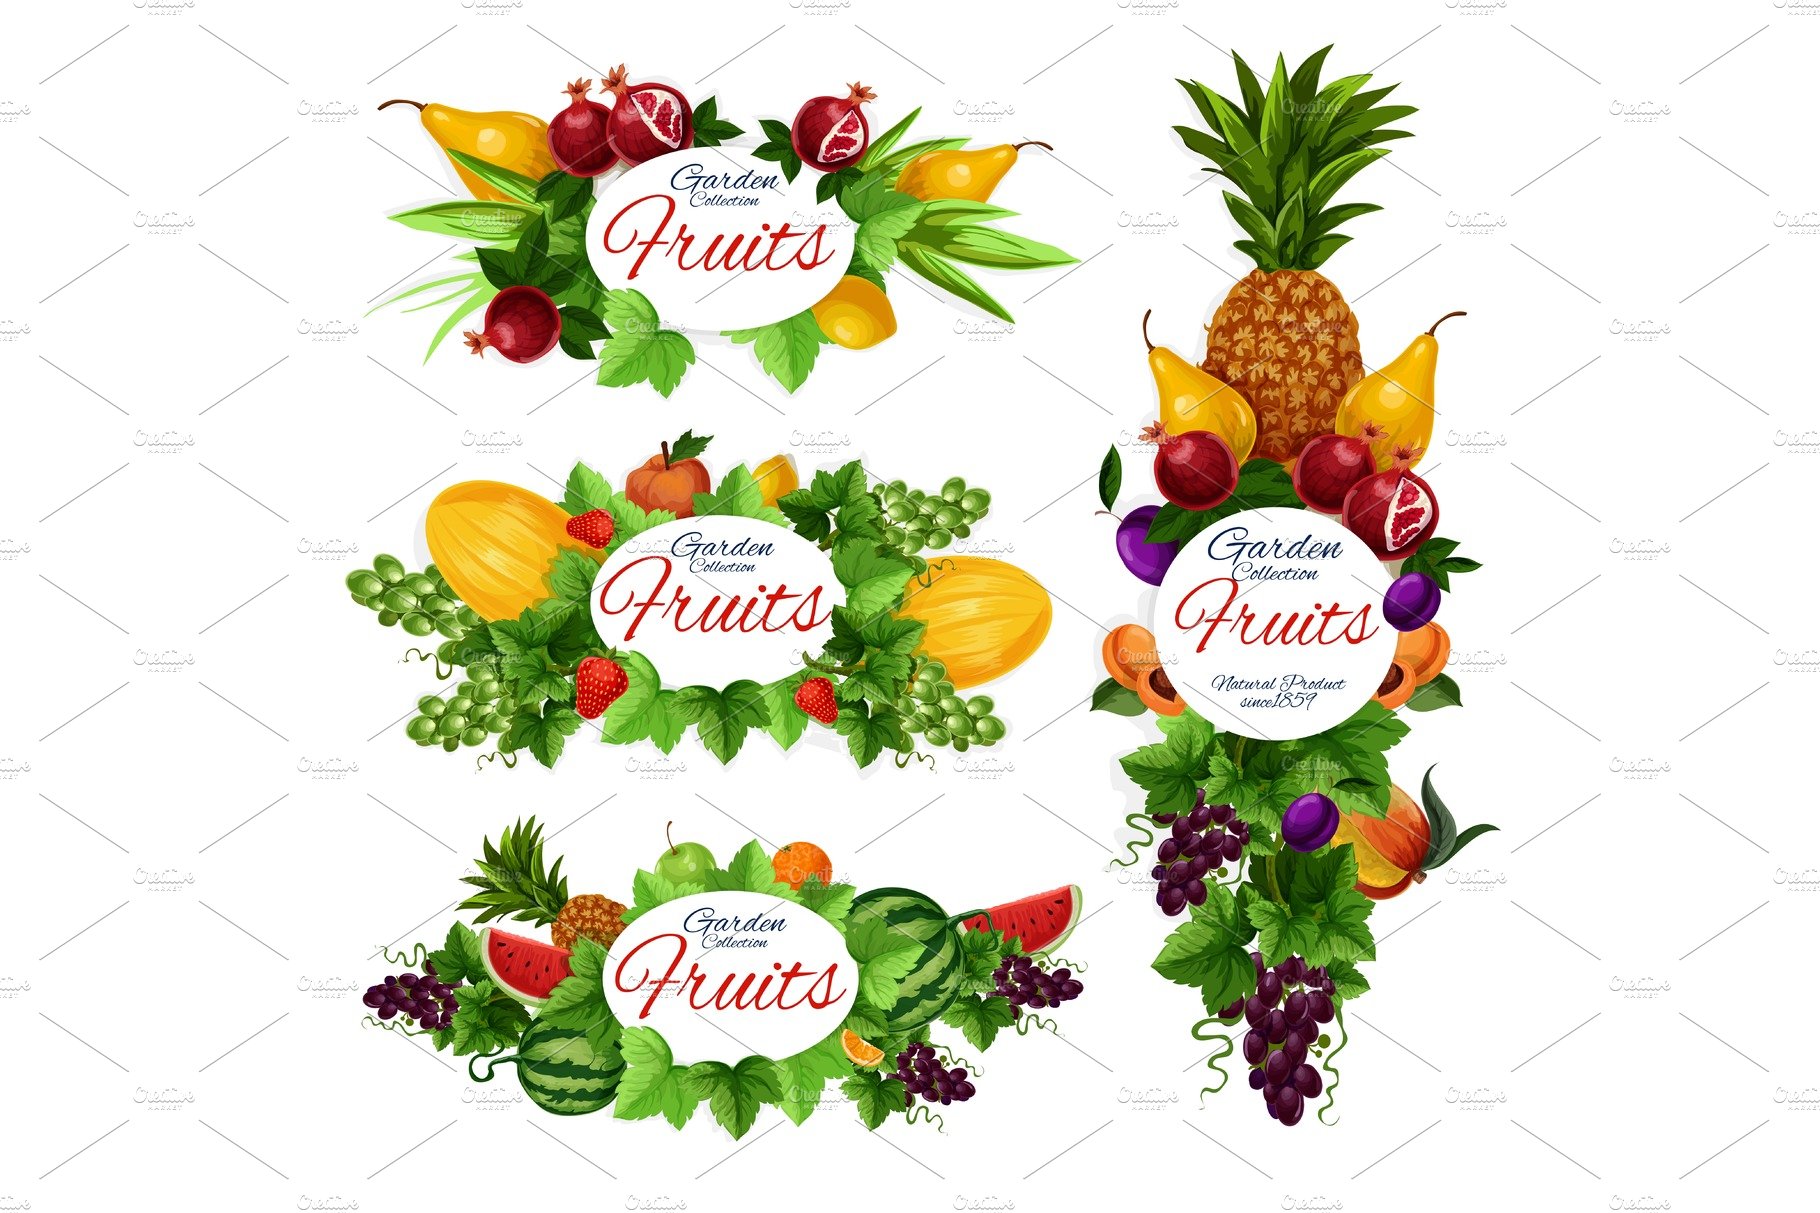 Natural fruits, grape and strawberry cover image.